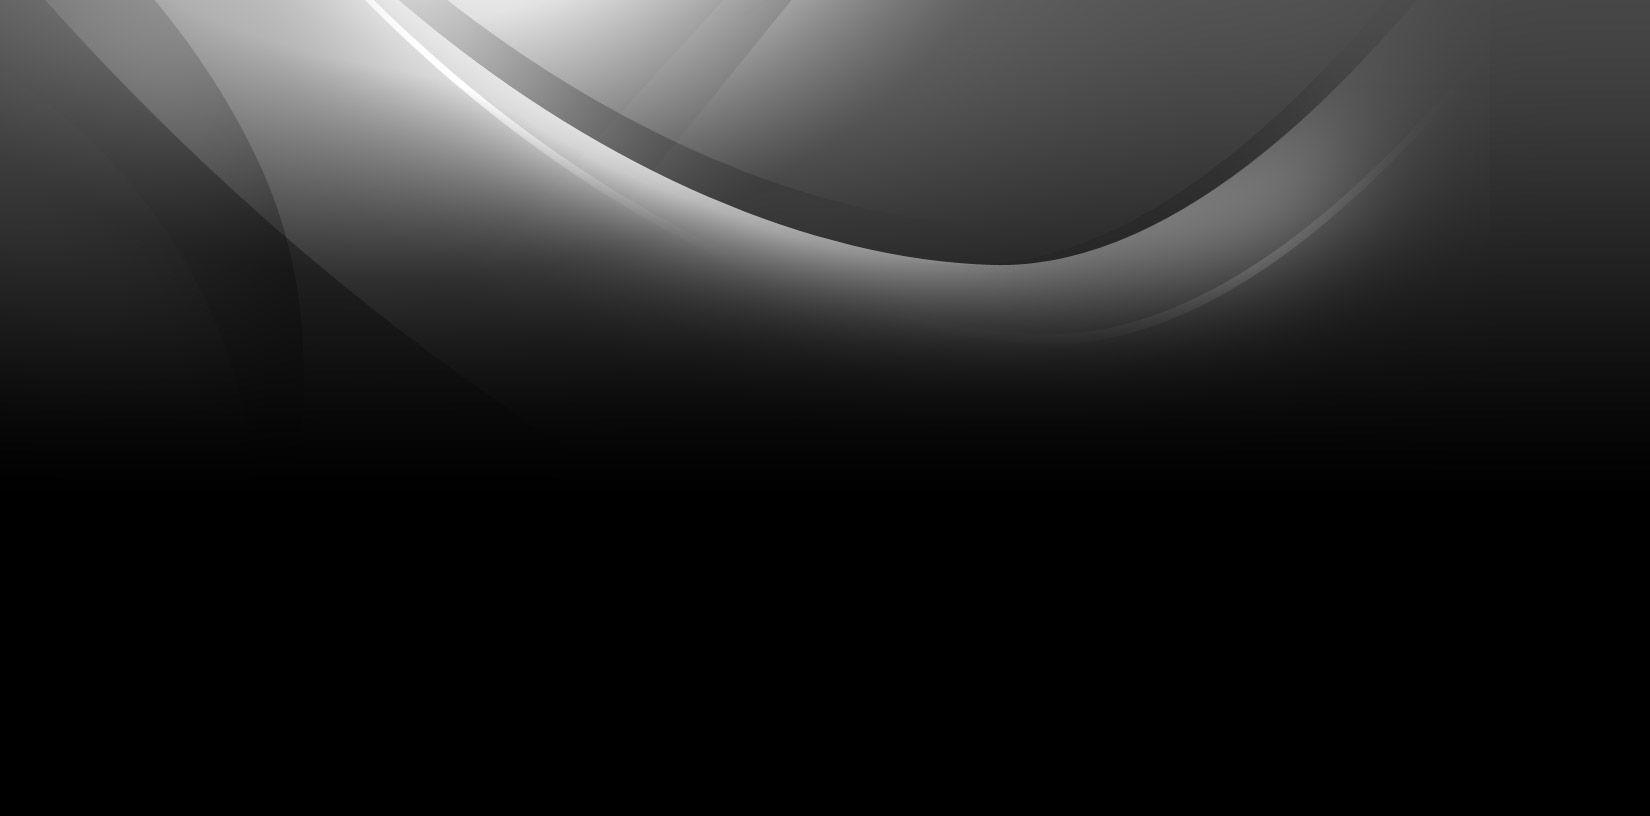 Wallpapers For > Black And White Gradient Backgrounds